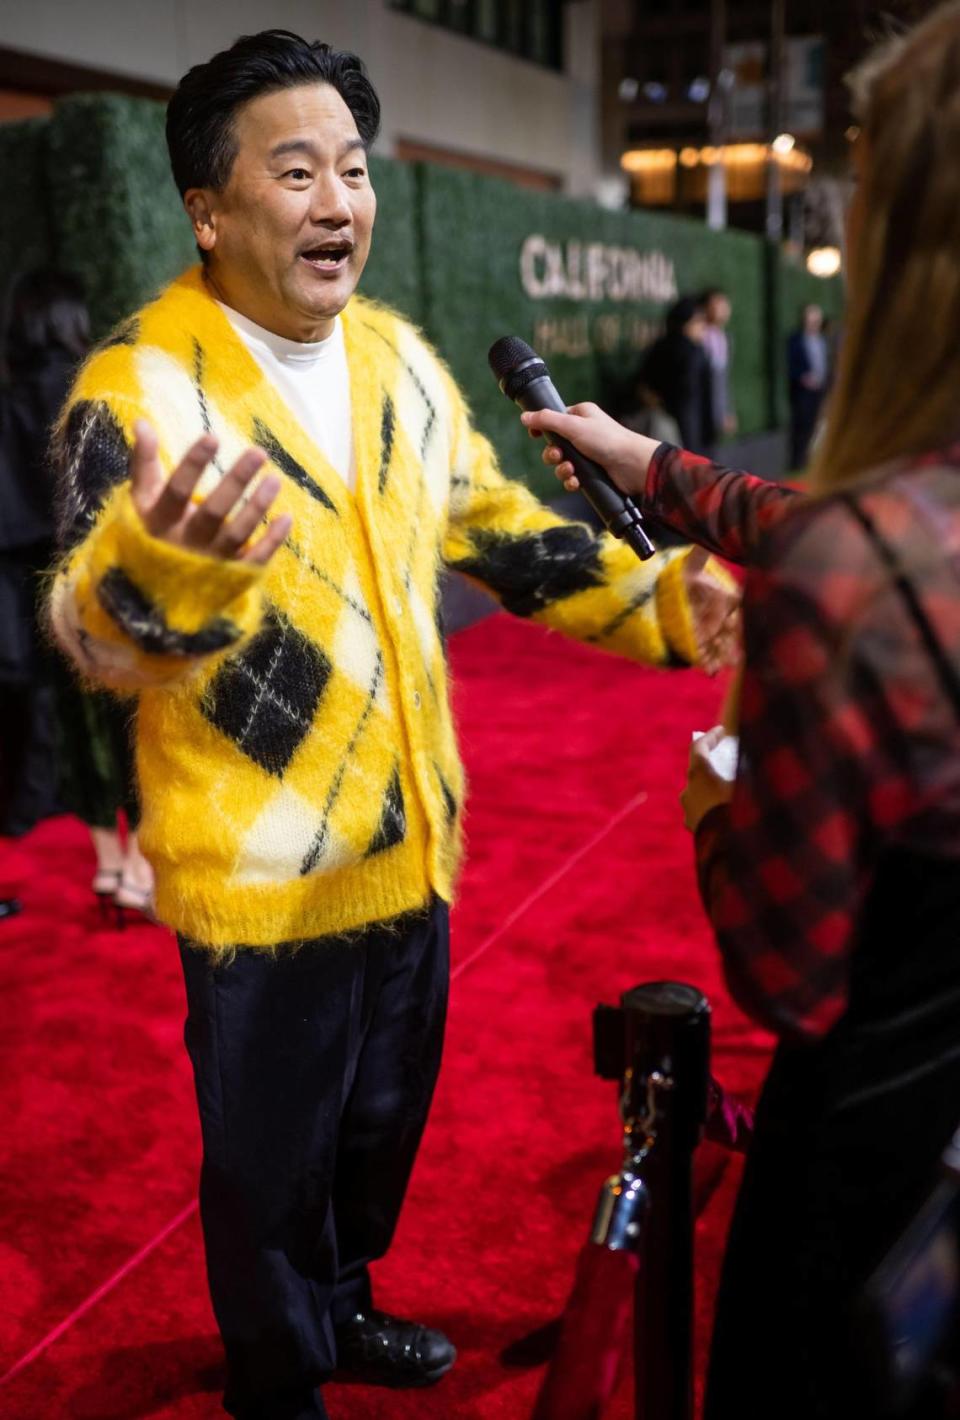 Chef Roy Choi, a restaurateur and show host known as one of the architects of the modern food truck movement, is interviewed on the red carpet before about being part of the 15th class of inductees to the California Hall of Fame on Tuesday, Dec. 13, 2022, before the induction ceremony at the California Museum in downtown Sacramento.